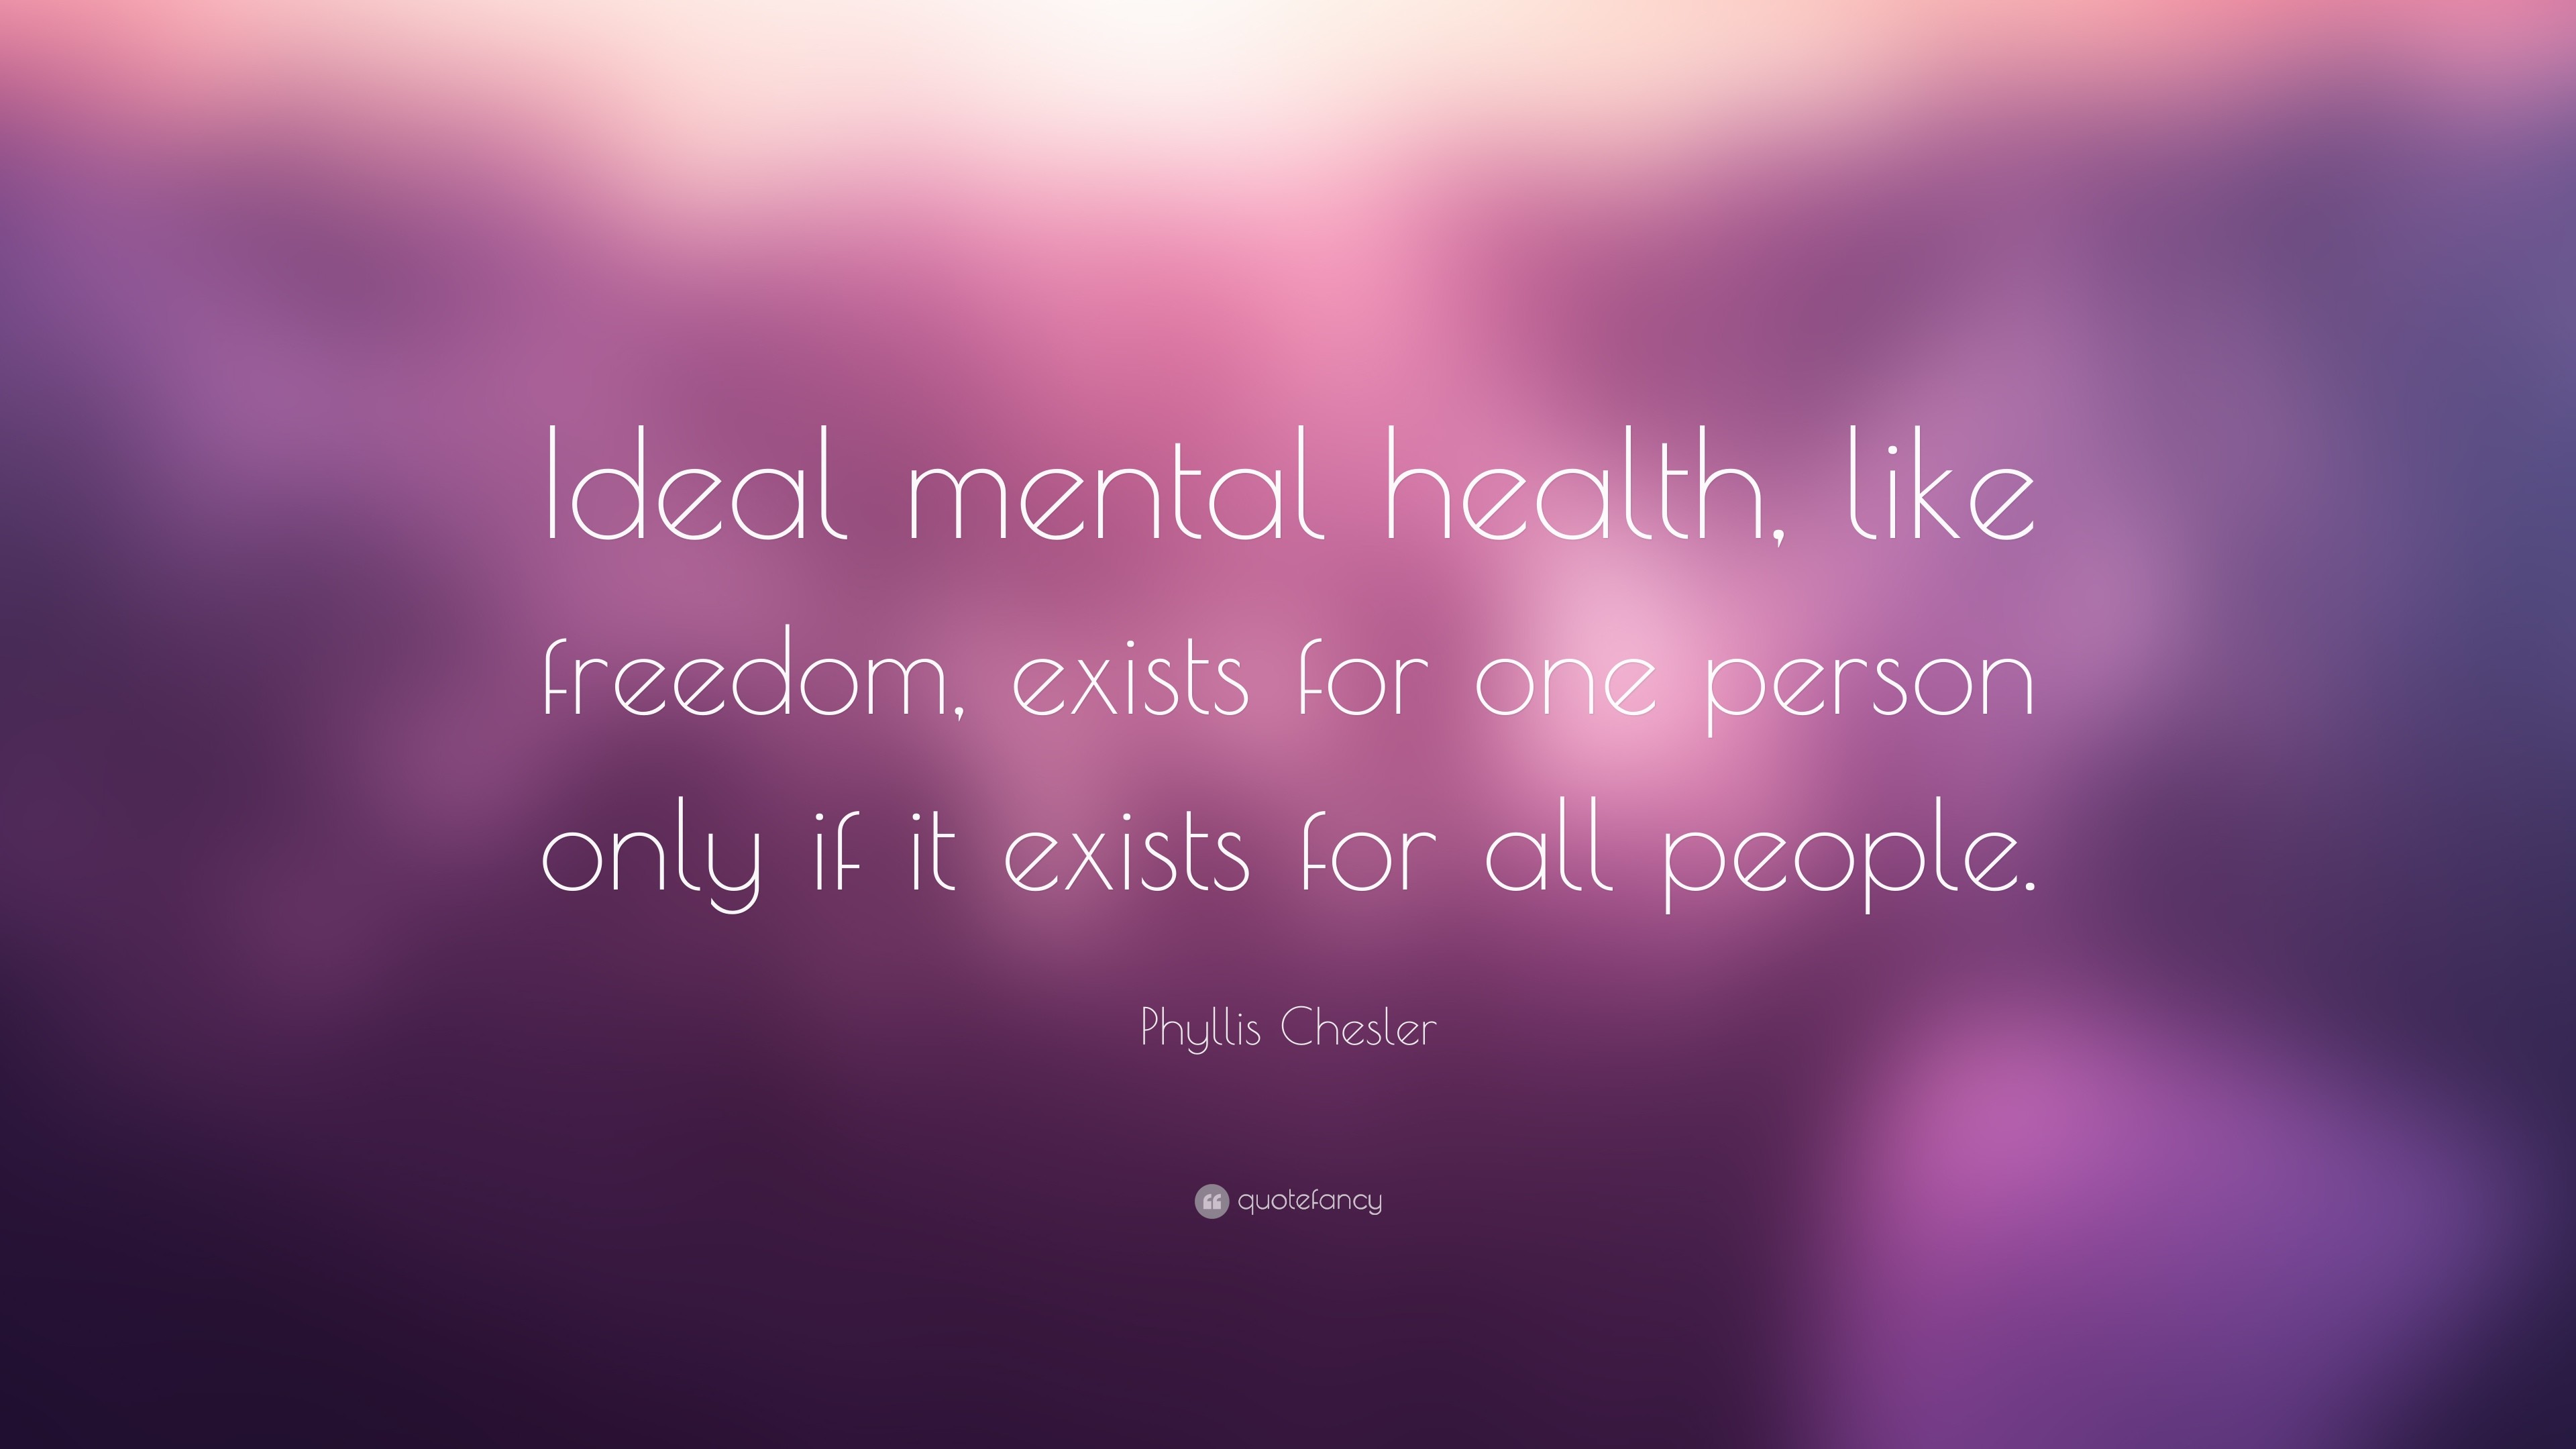 3840x2160 Phyllis Chesler Quote: “Ideal mental health, like freedom, exists for one  person